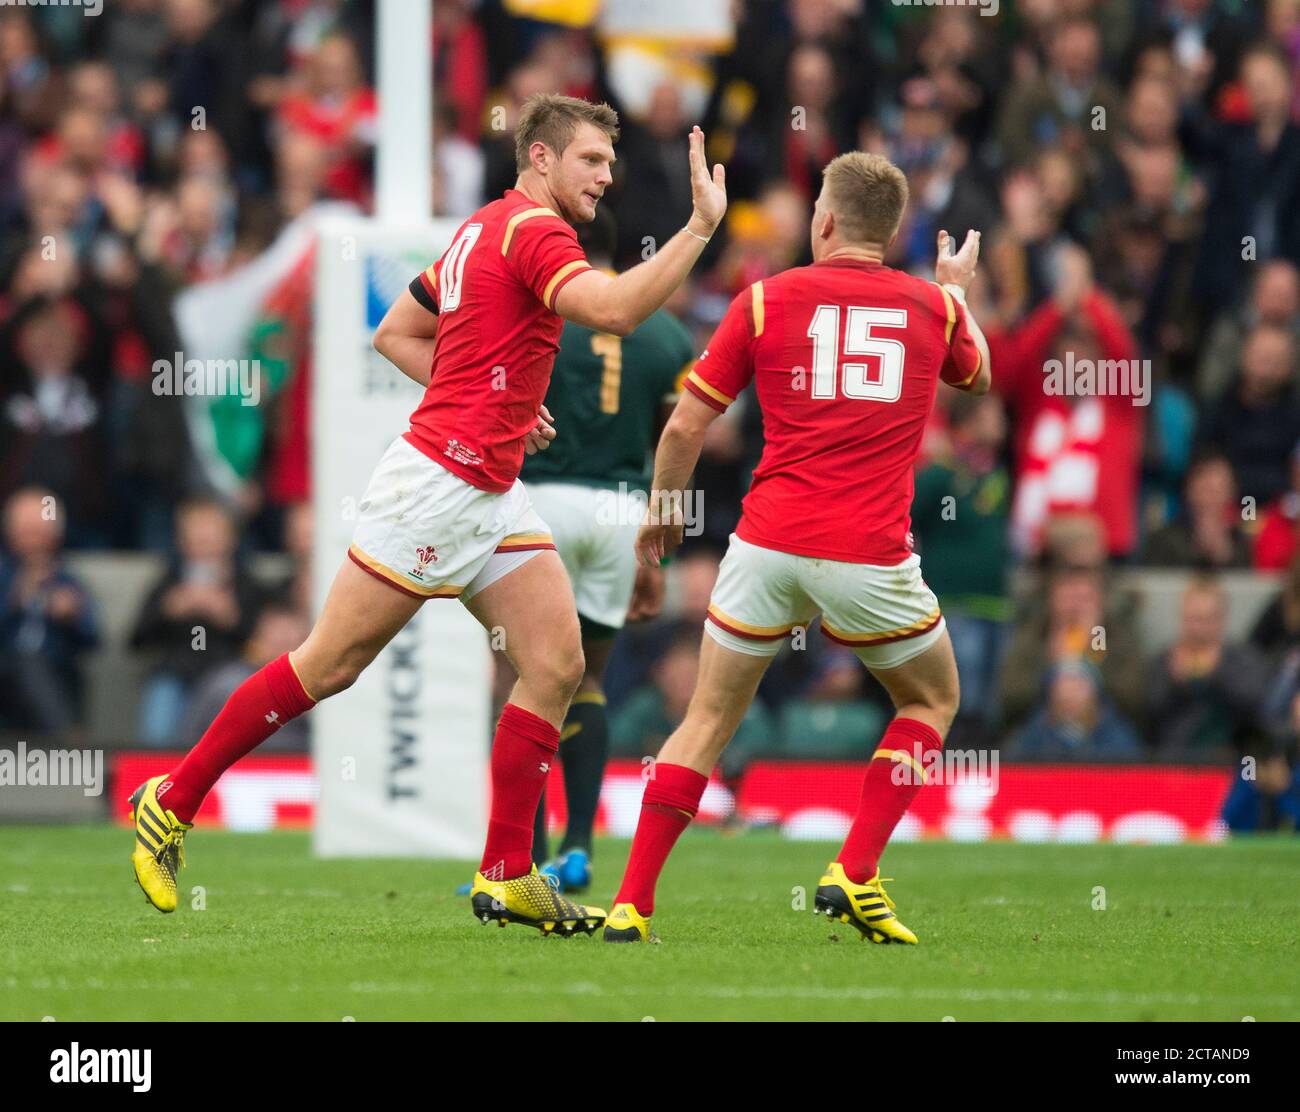 DAN BIGGAR IS CONGRATULATED BY GARETH ANSCOMBE ON KICKING A DROP GOAL IN THE FINAL SECONDS OF THE FIRST HALF TO SEND WALES IN AT HALF TIME 13-12 UP  W Stock Photo